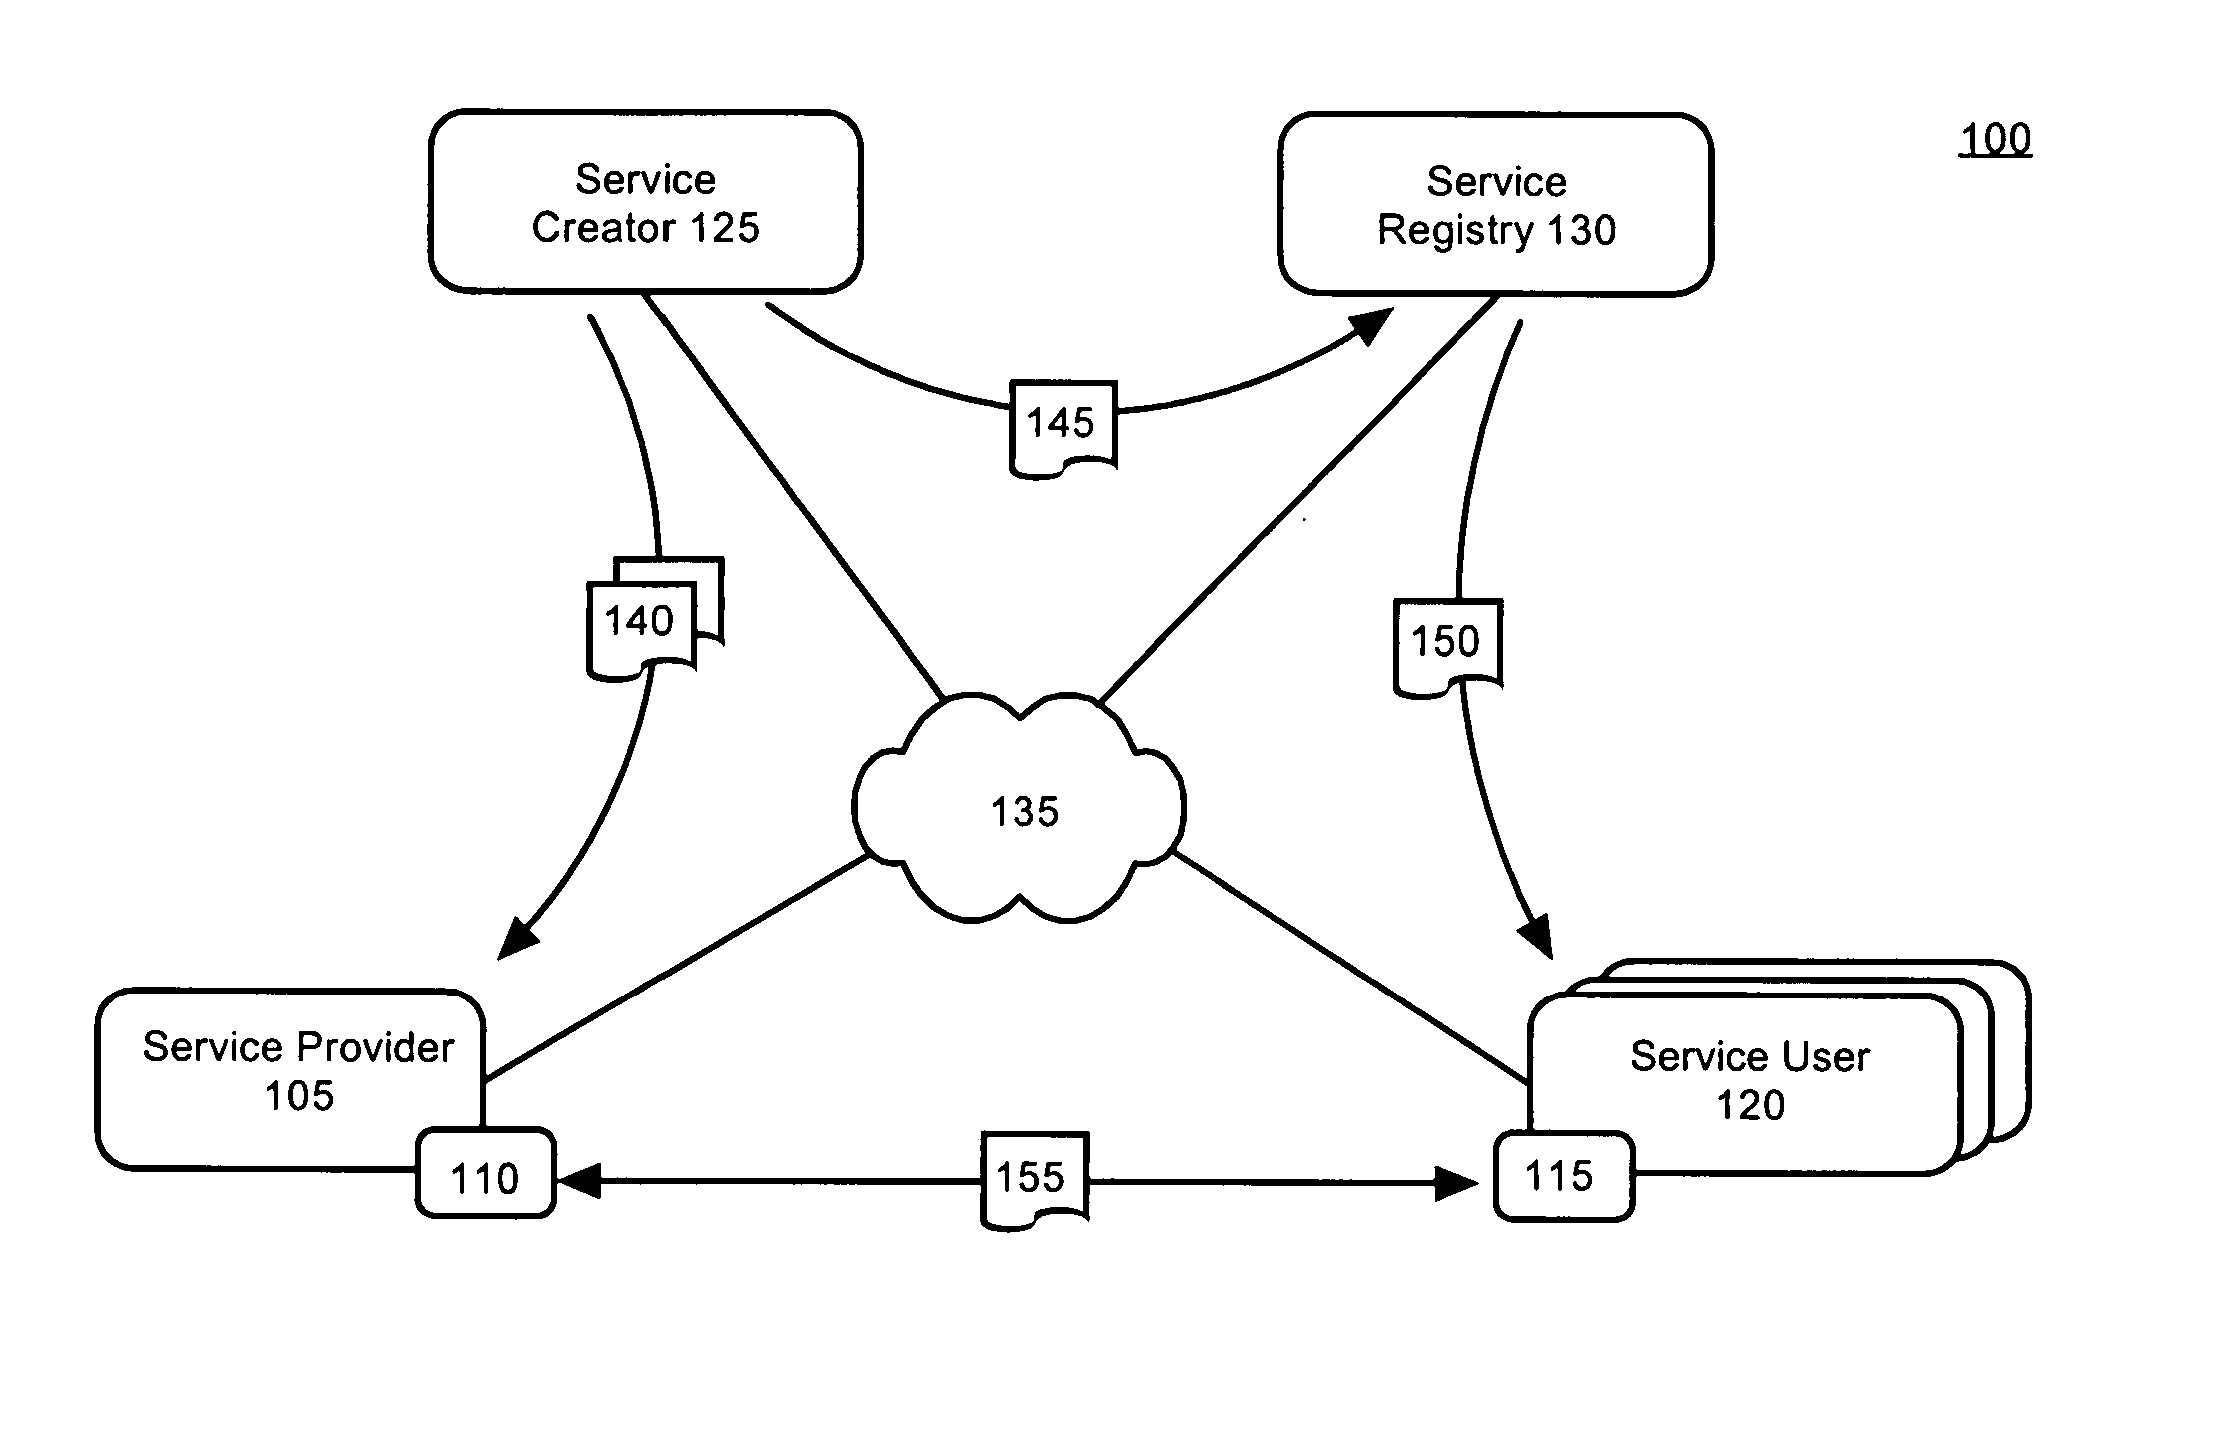 Providing web services from a service environment with a gateway